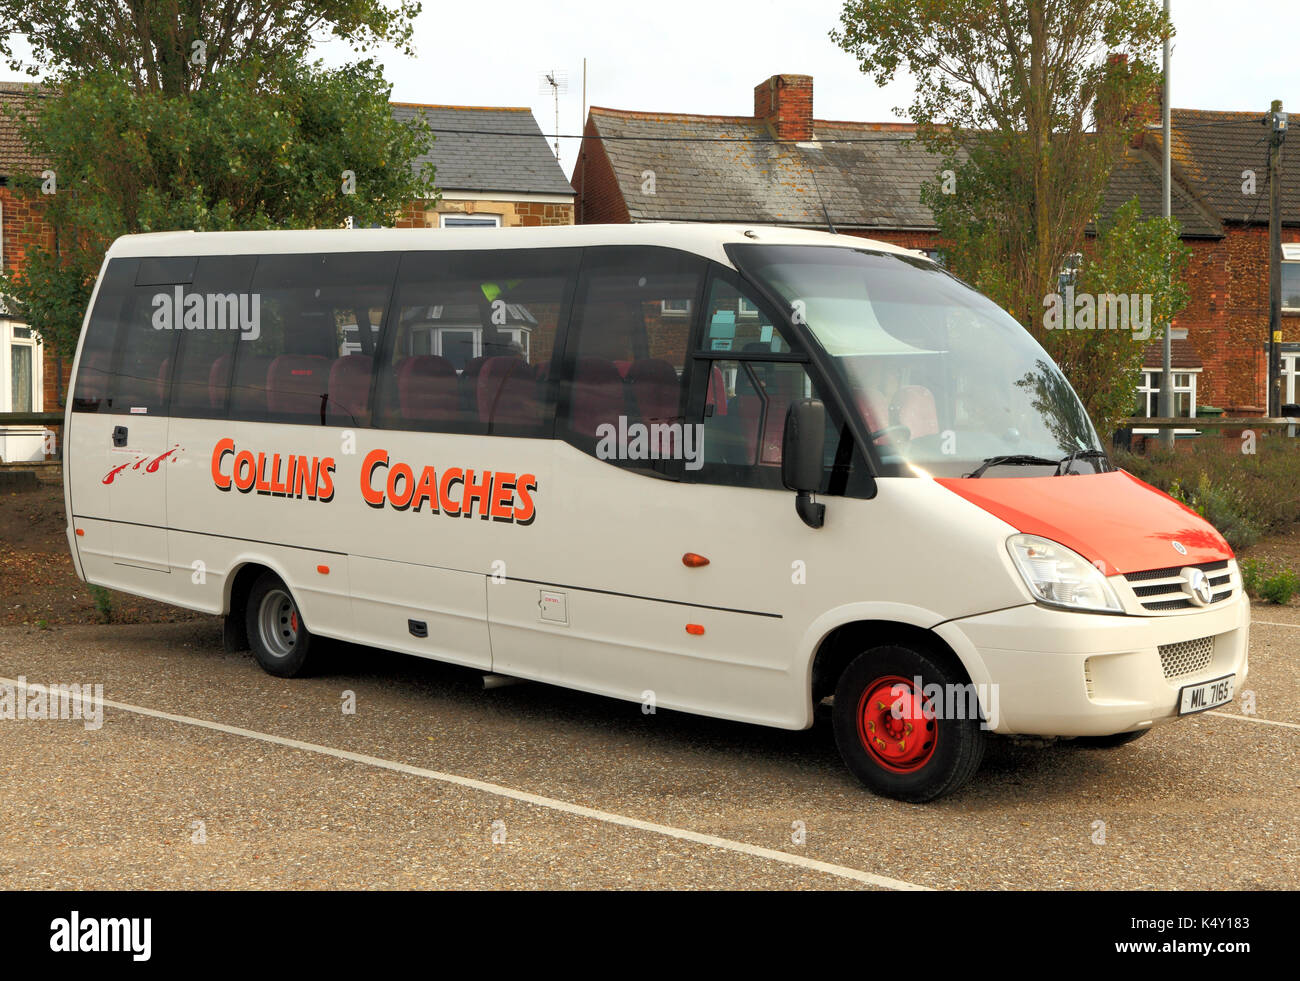 Collins Coaches, coach, day trip, trips, excursion, excursions, travel company, companies, transport, travel. mini coach, England, UK Stock Photo